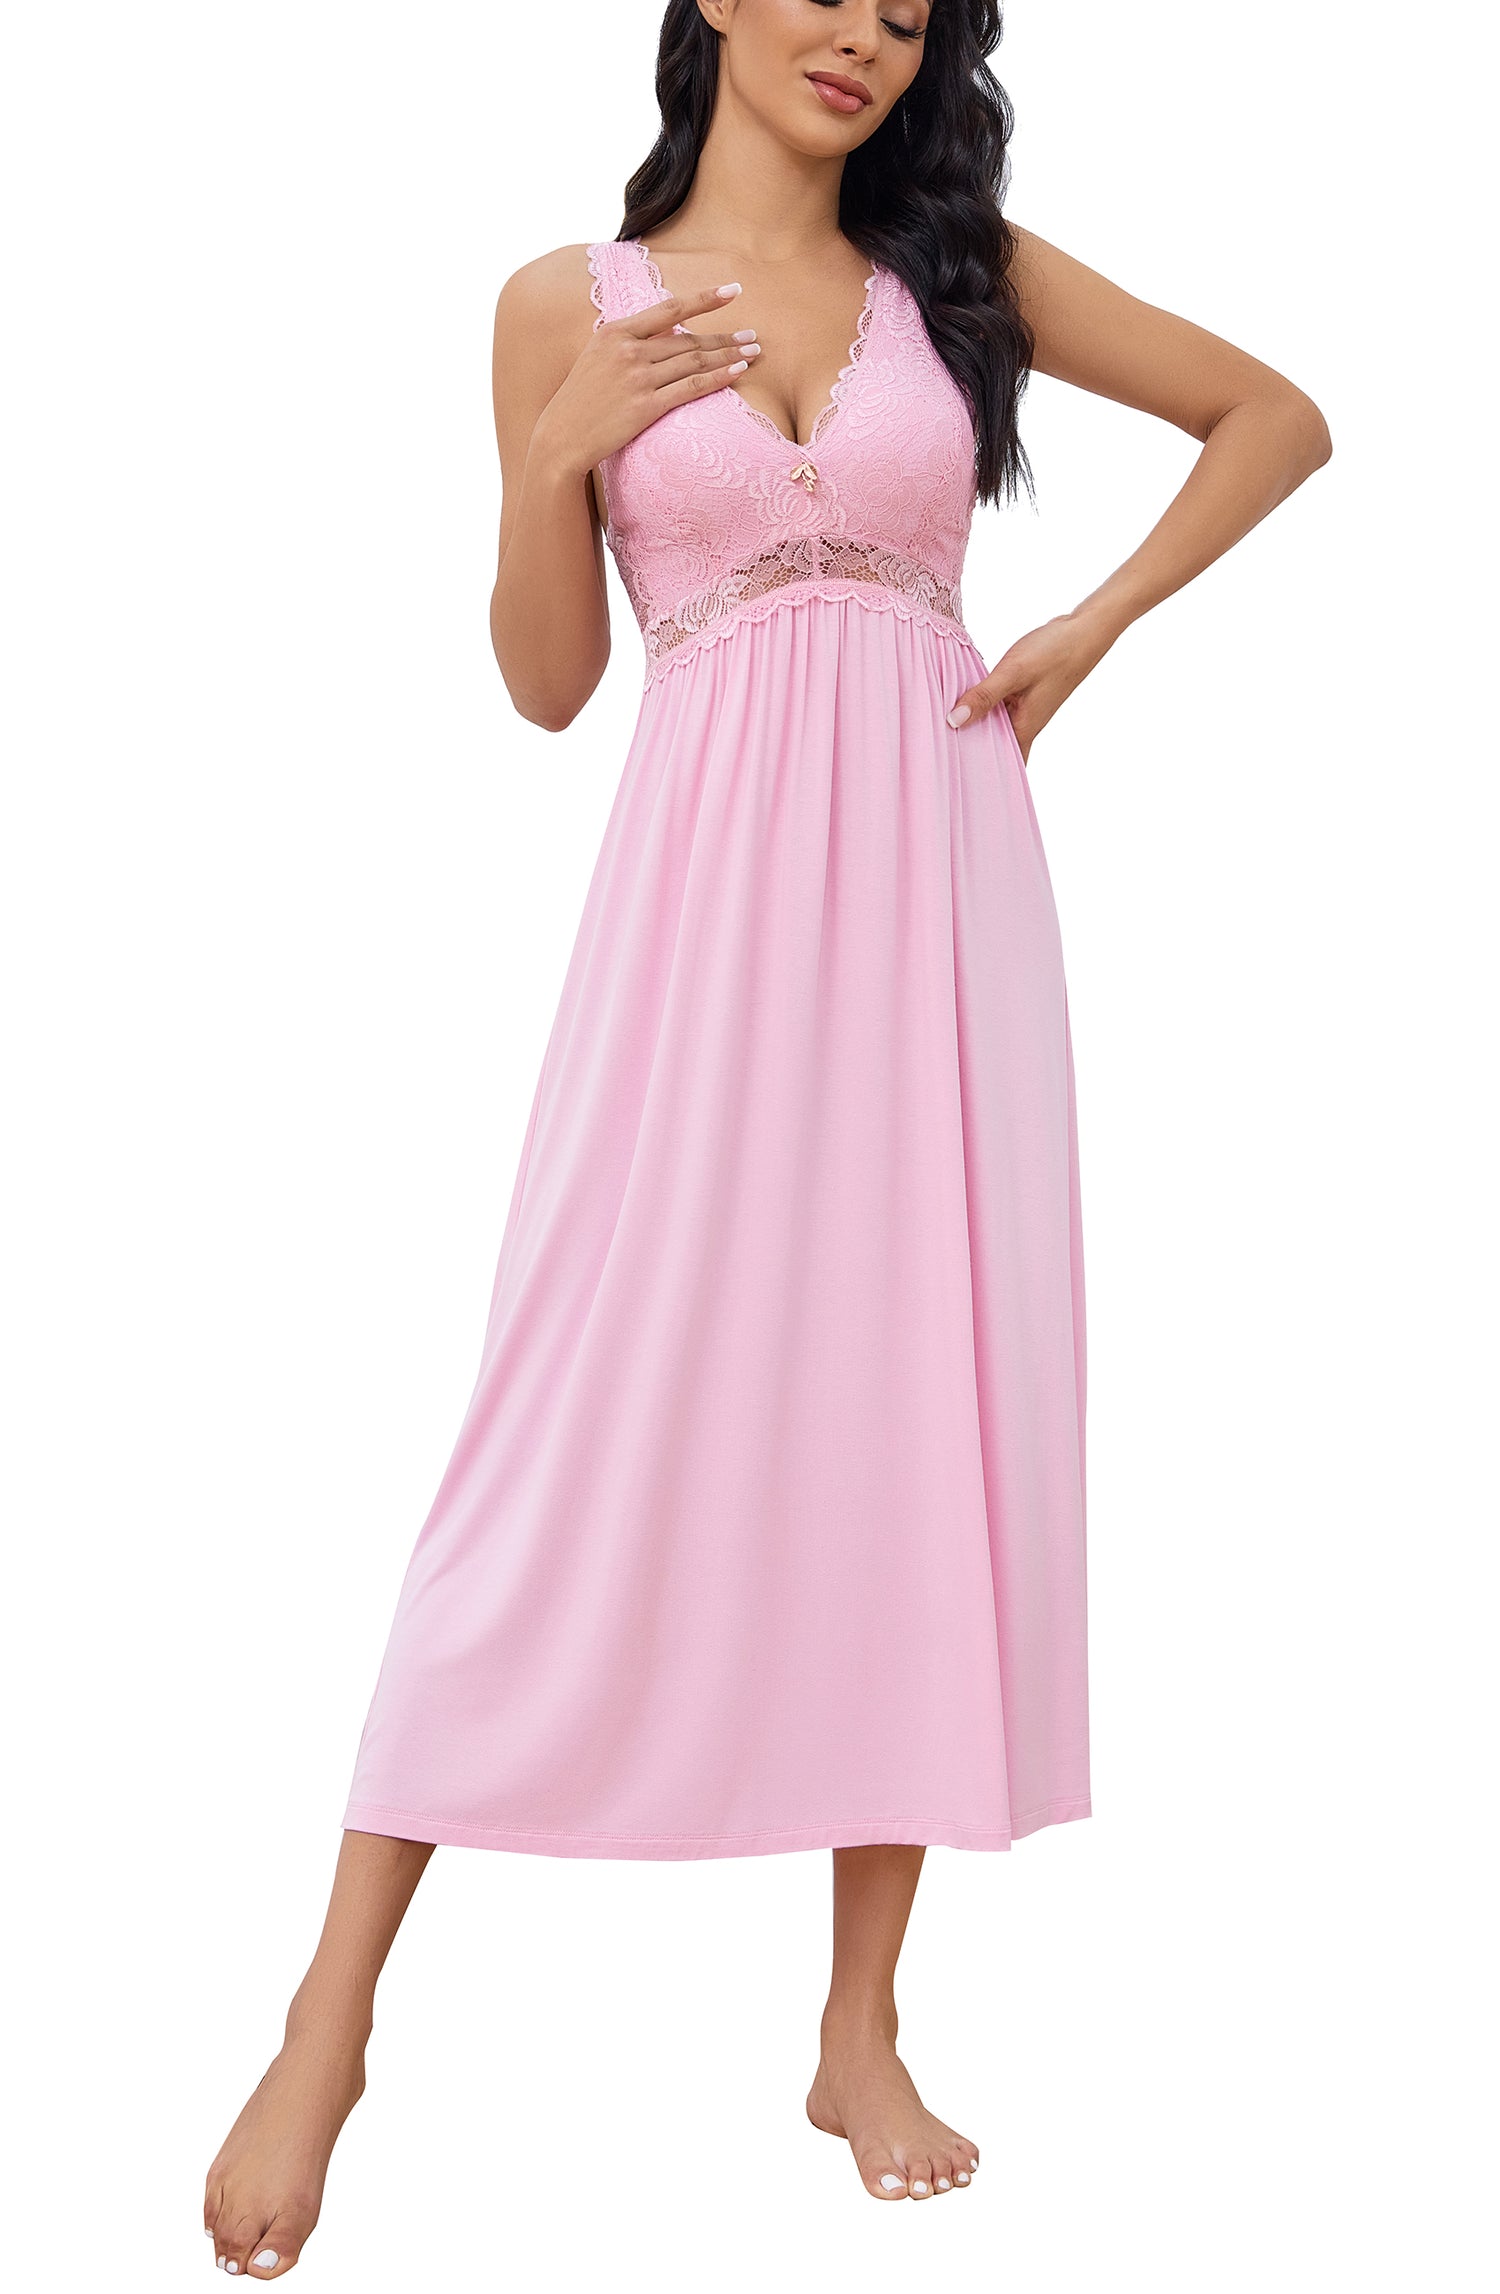 Sexy Lace Jersey Elegant Long Nightgown Chemises-PINK